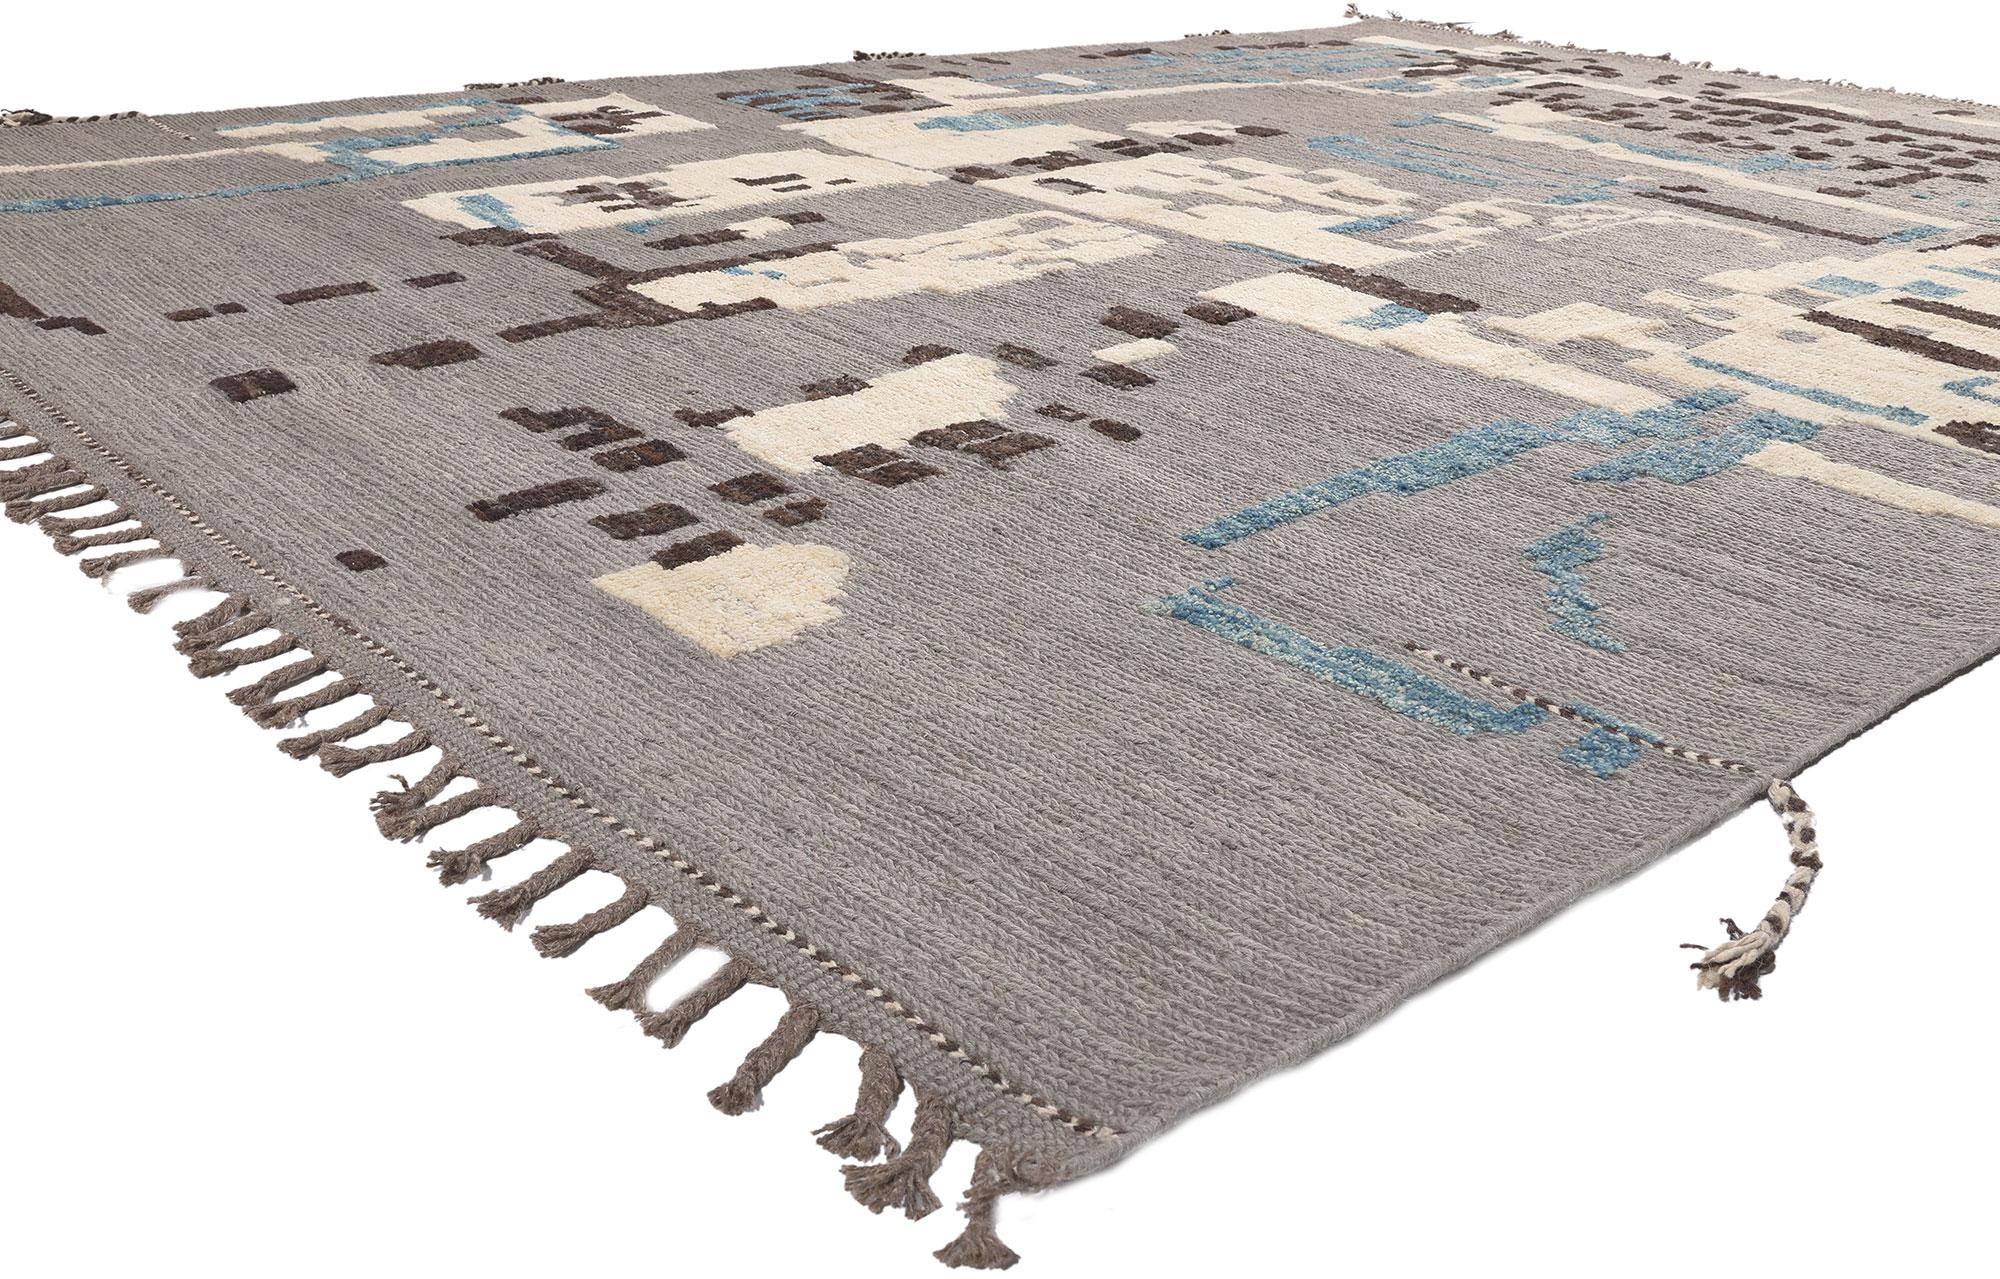 80983 Modern Moroccan Area Rug with Earth-Tone Colors, 09'09 x 13'04.
Emanating Biophilic Design with incredible detail and texture, this large Moroccan high-low rug is a captivating vision of woven beauty. The raised design and earthy colorway